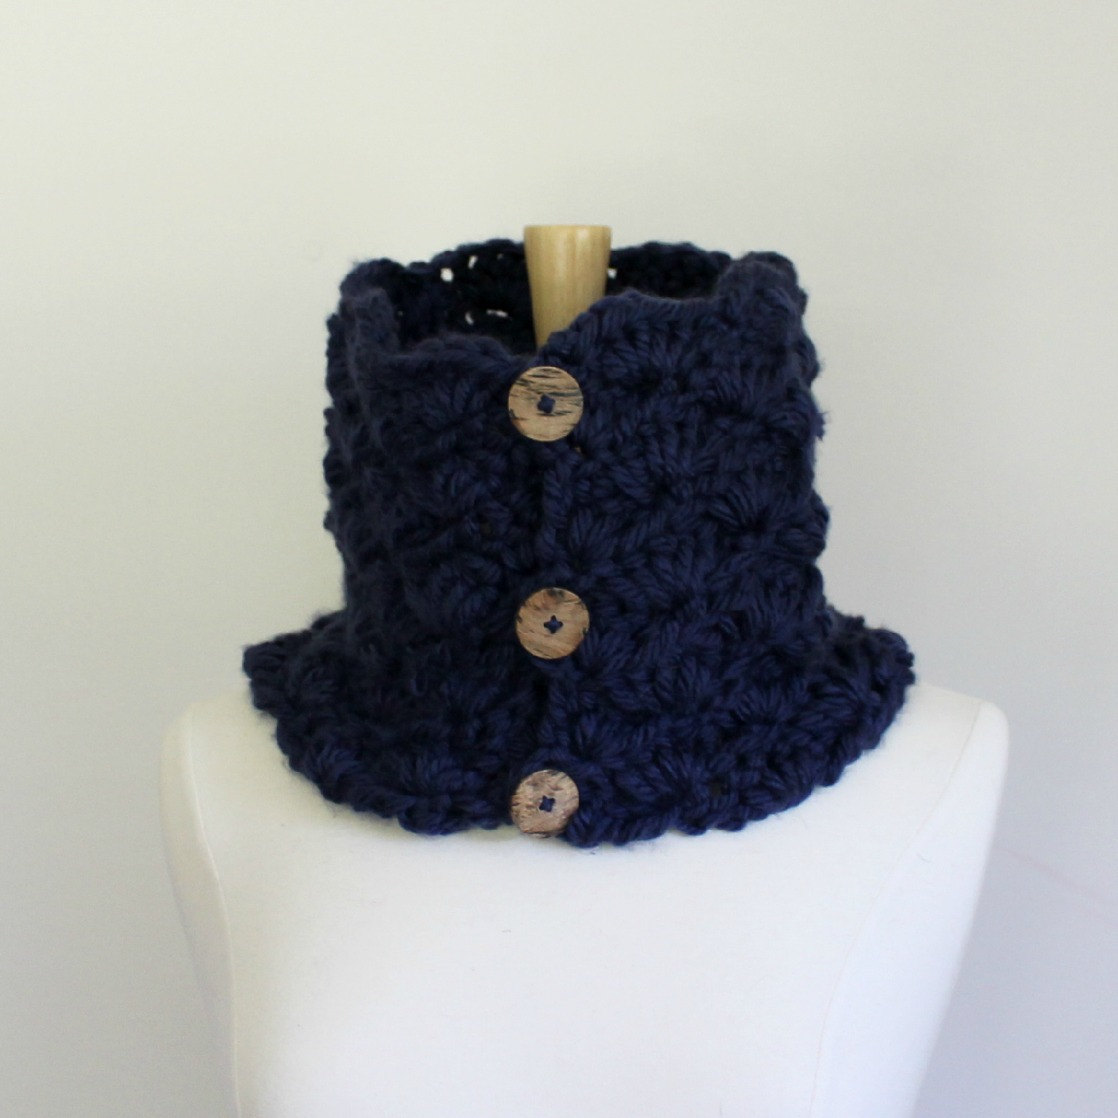 Hand Crochet Chunky Cowl Scarf - Navy Blue Scarf With Three Button Closure - Circle Scarf - Women's Winter Accessory - Ready To Ship